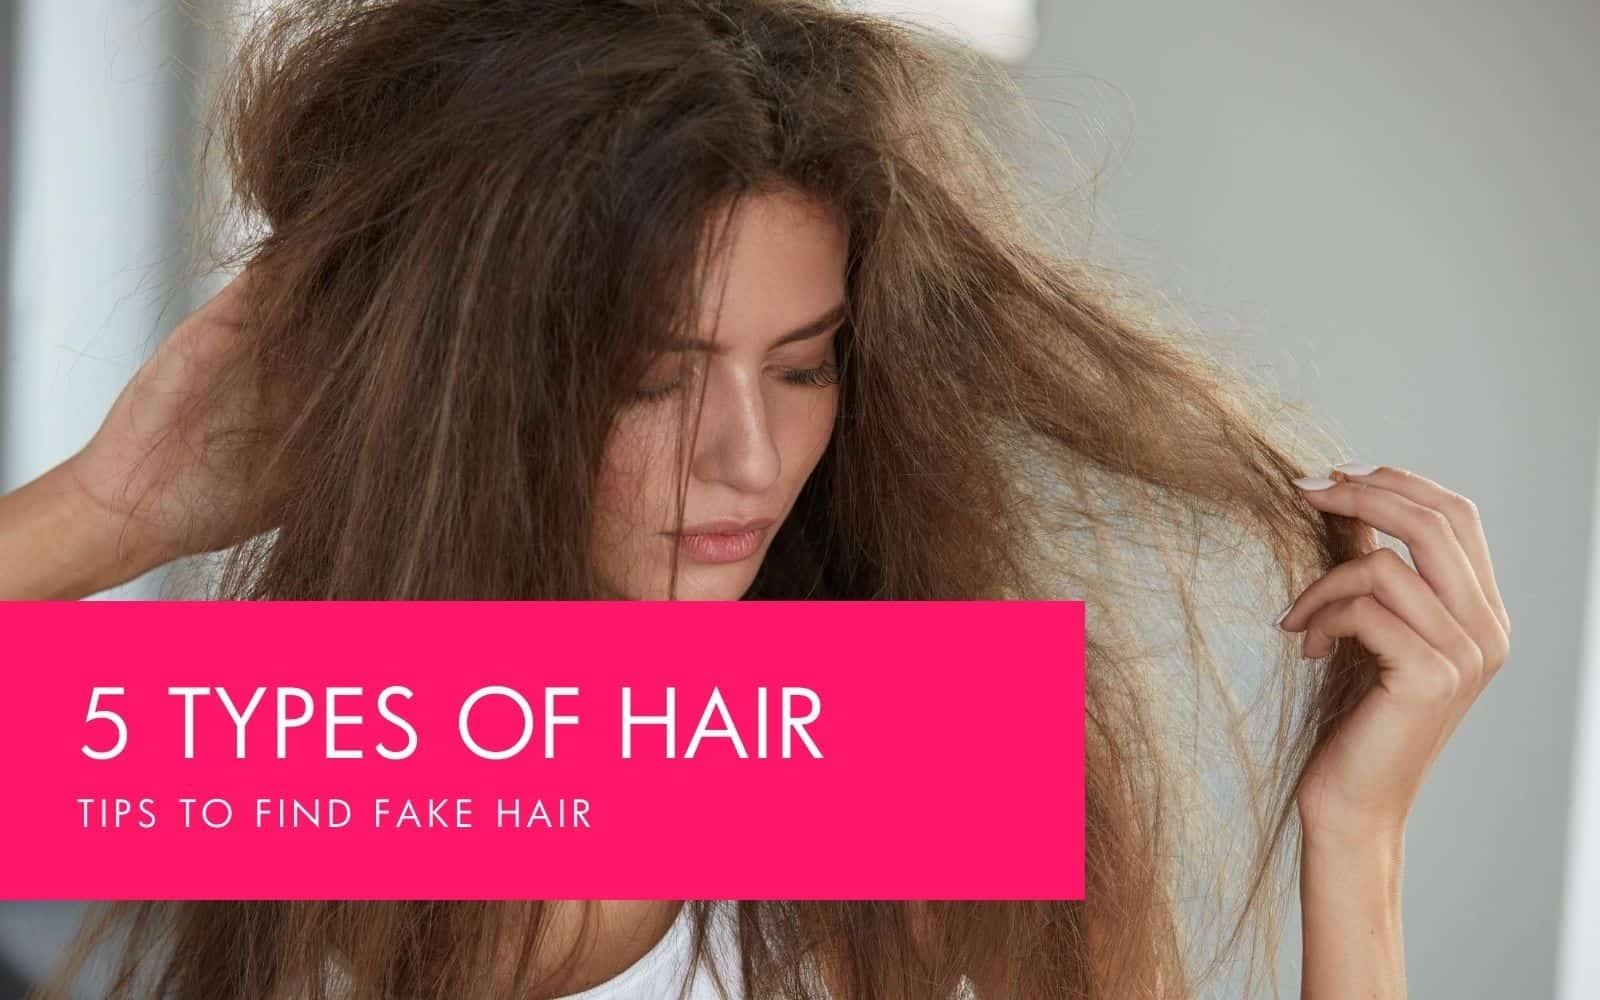 Types Of Hair: Choose Your Actual Hair Type